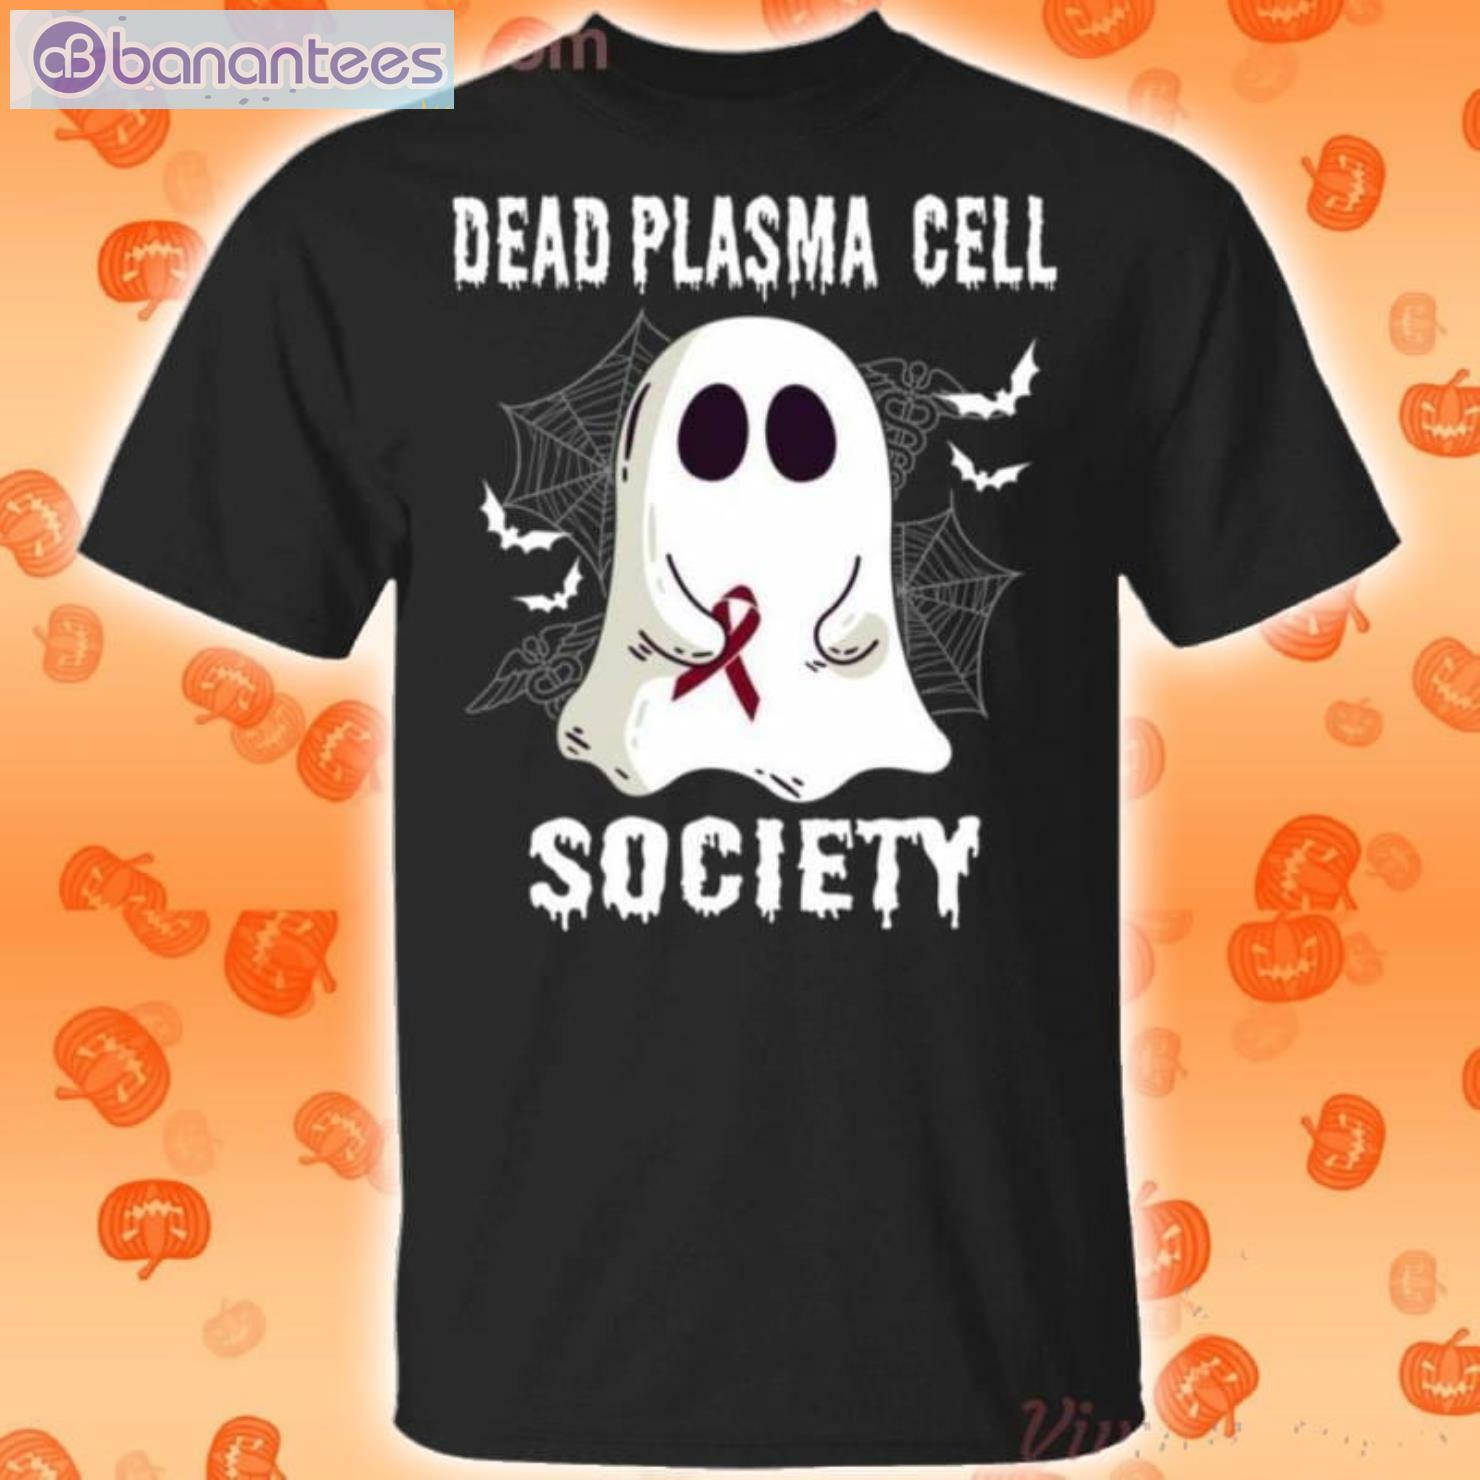 Dead Plasma Cell Society Boo Ghost Halloween Funny T-Shirt Product Photo 1 Product photo 1